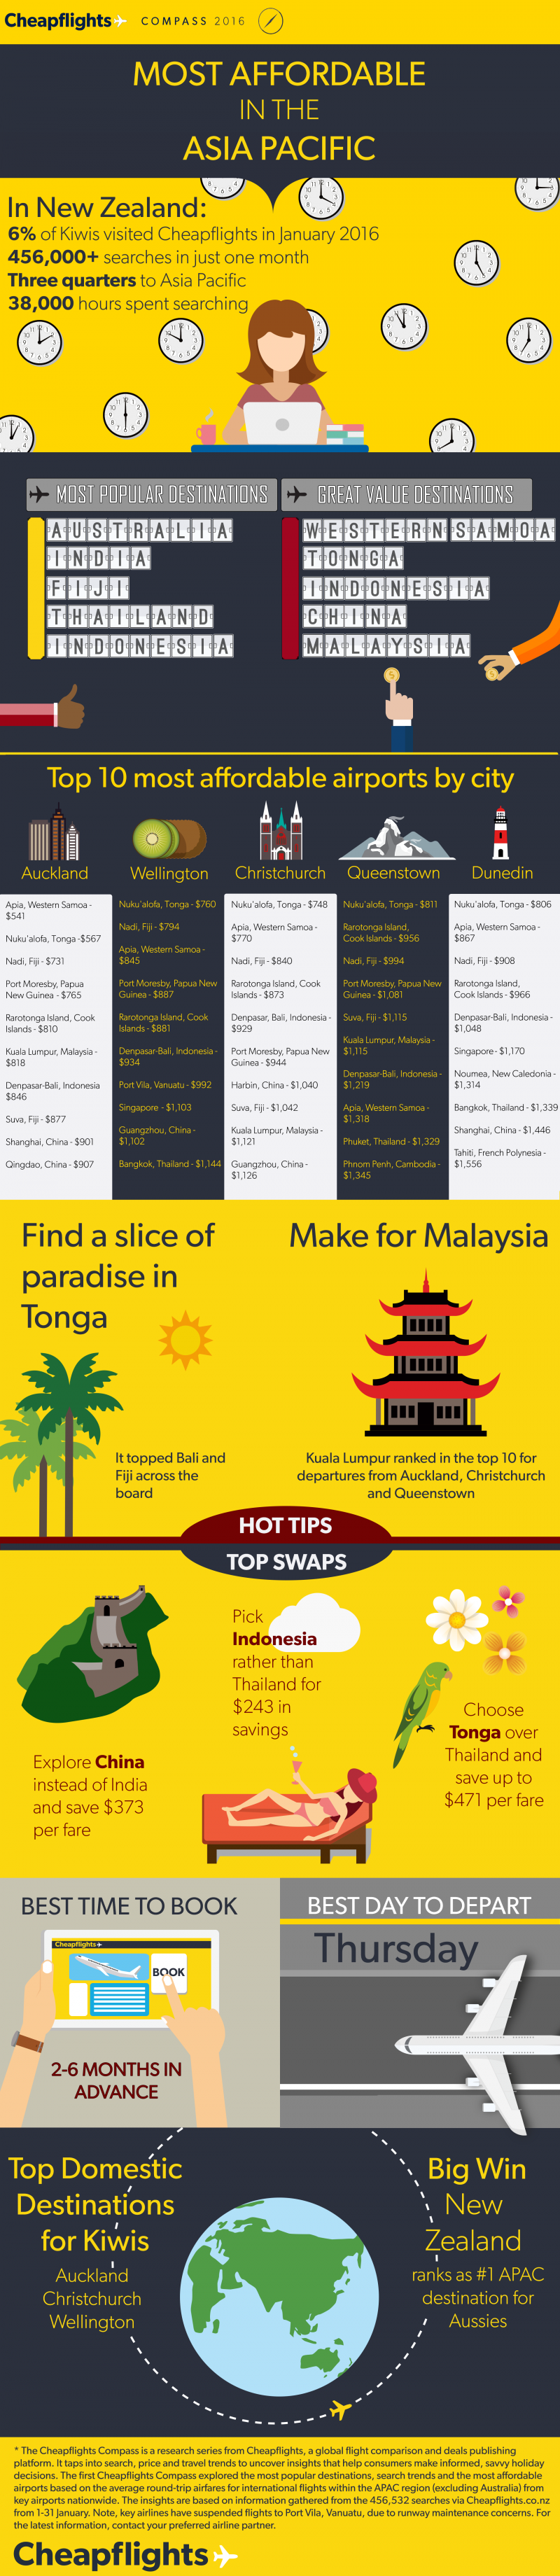 NZ INFOGRAPHIC - Most Affordable Aiports in APAC - Cheapflights Compass